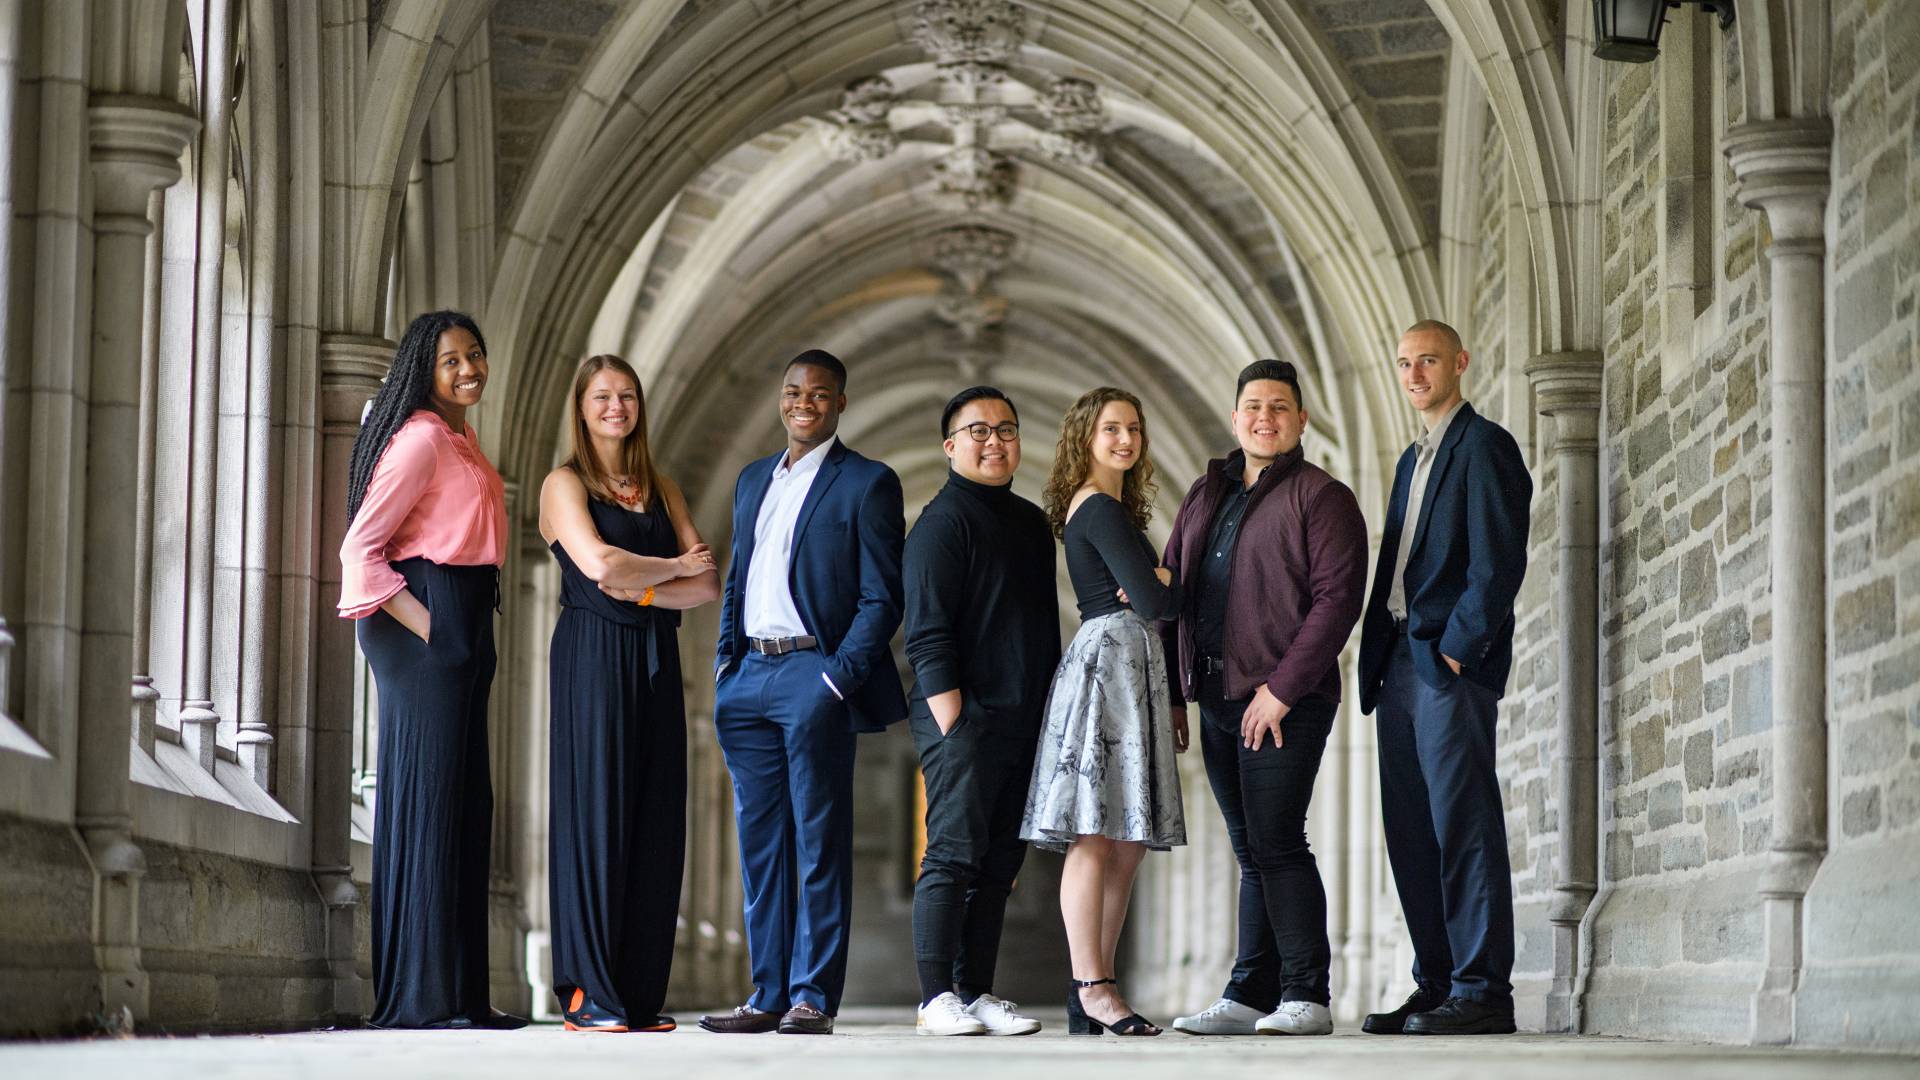 Nenna Ibe, Hannah Paynter, Moyin Opeyemi, G.J. Sevillano, Marcia Brown, Samuel Vilchez Santiago and Kyle Lang standing in an iconic archway